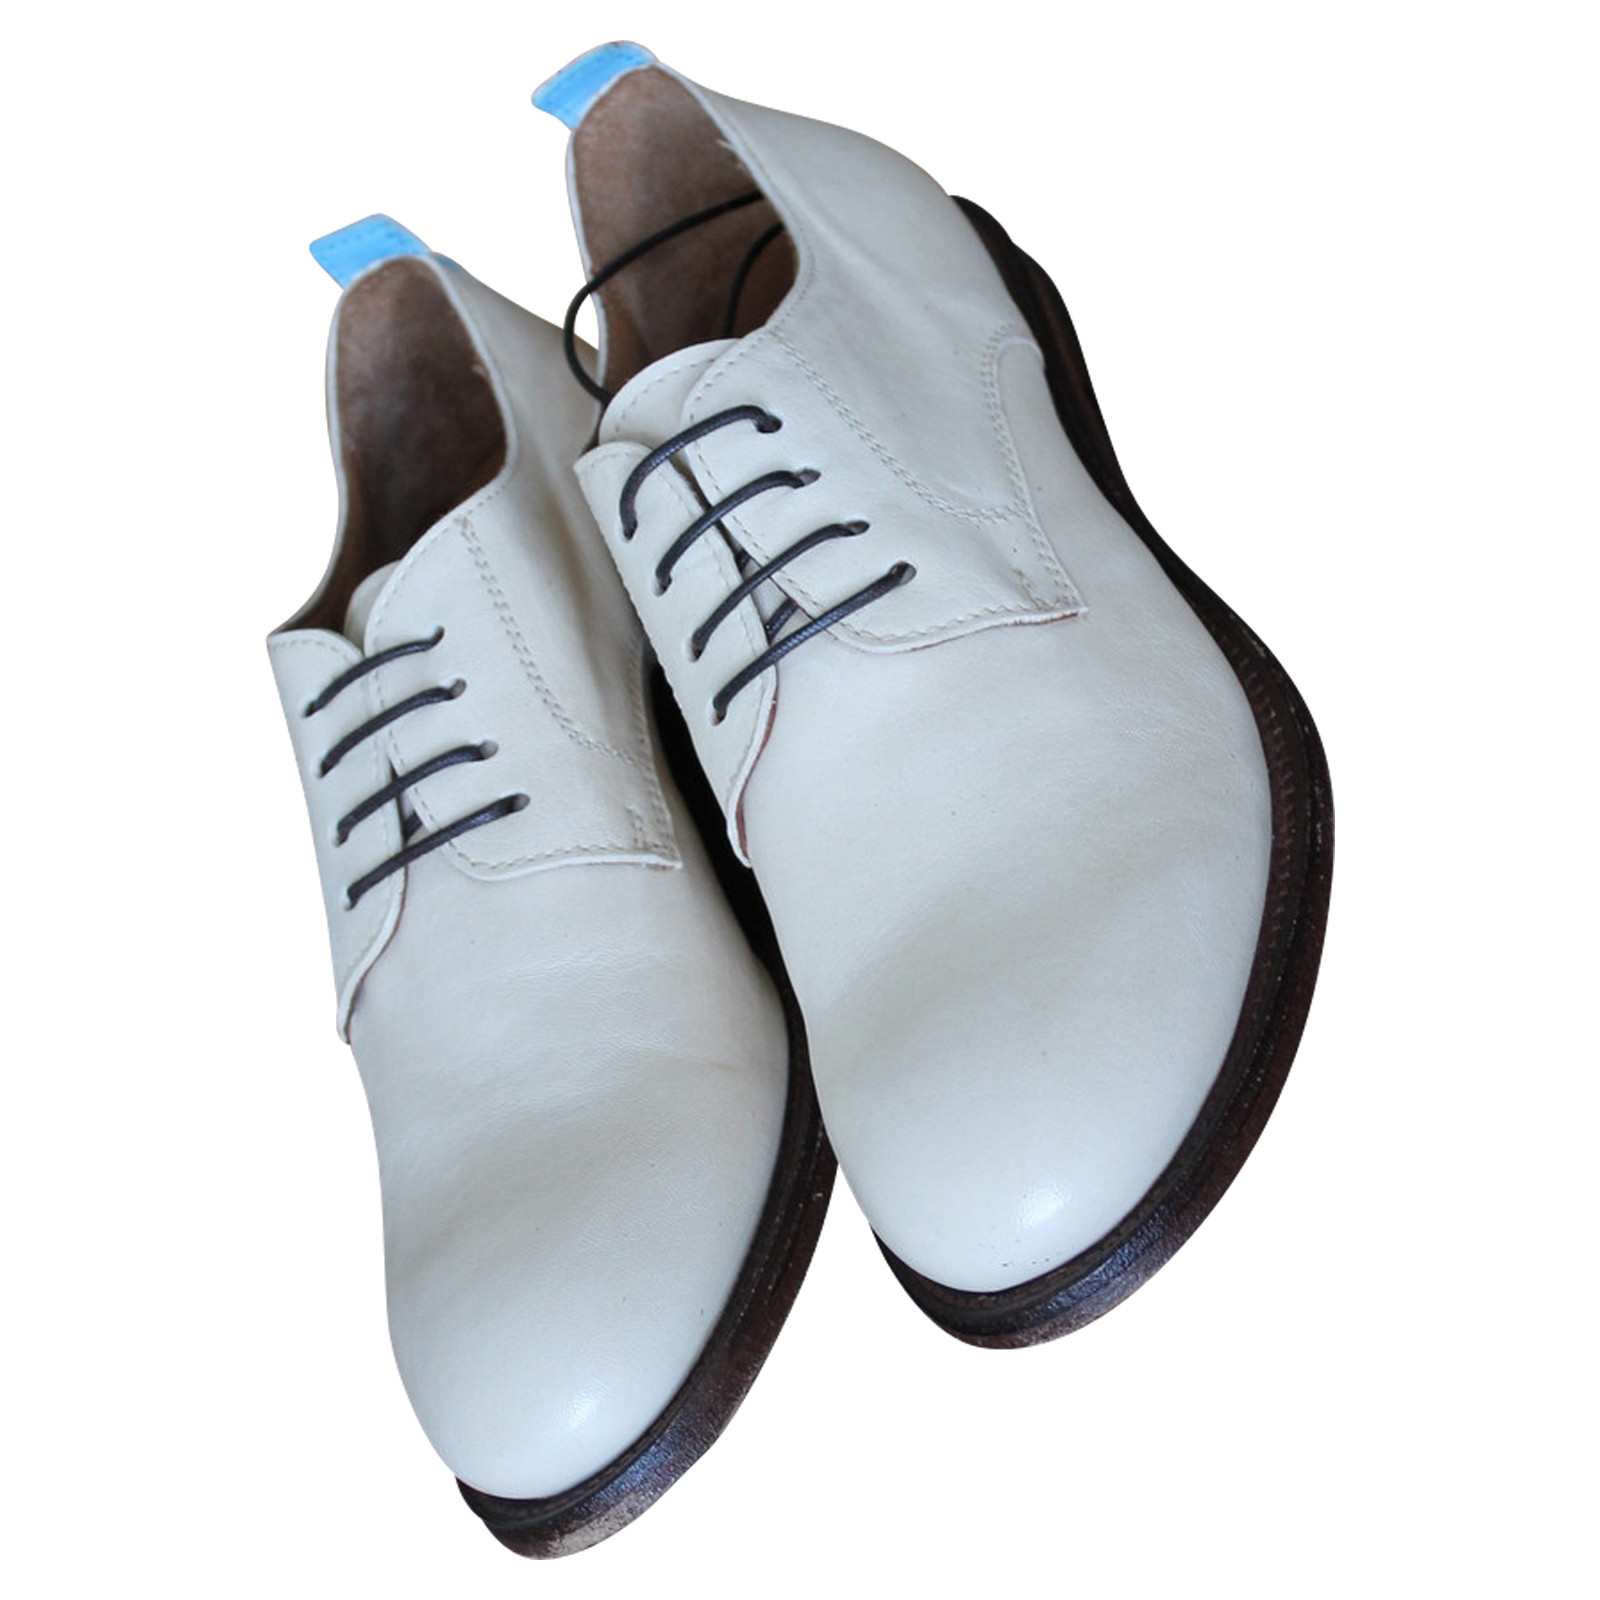 Moma Lace-up shoes Leather in White - Second Hand Leather in White buy used for 71€ (5994281)